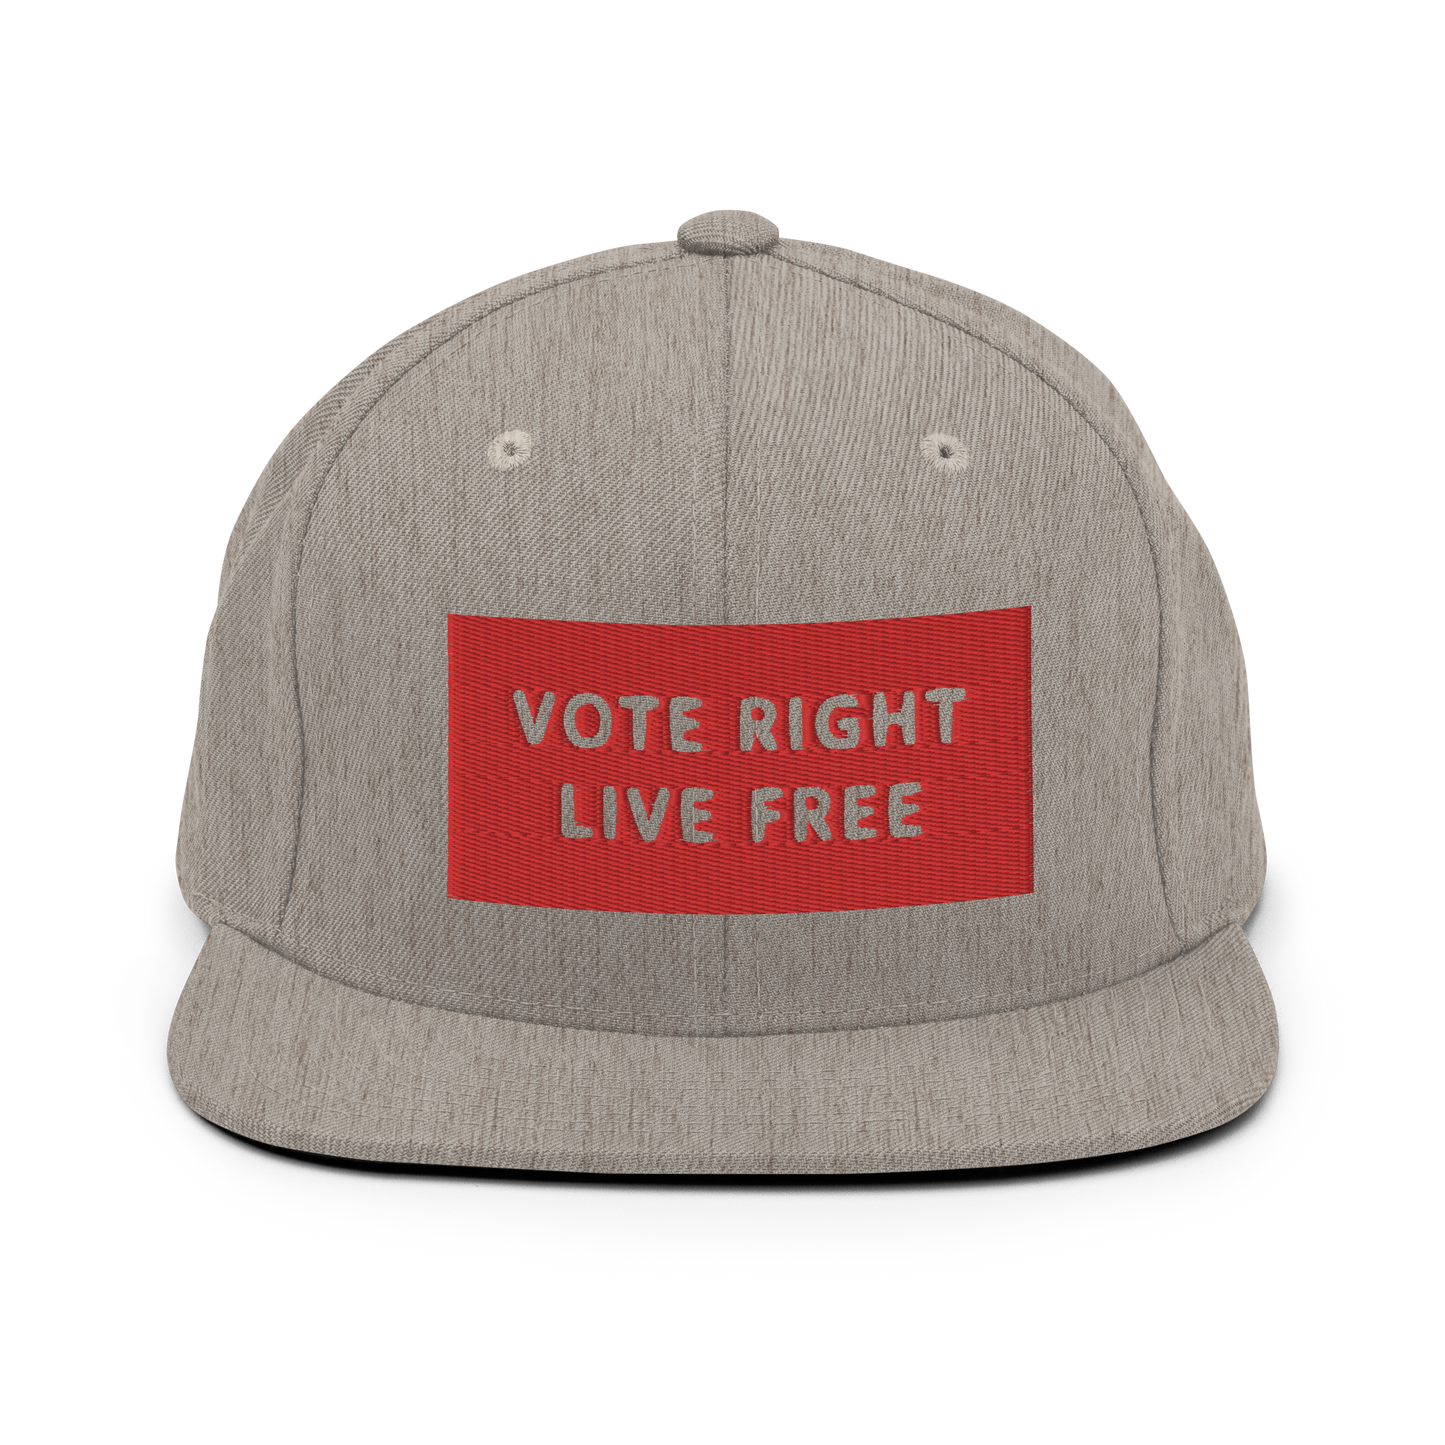 Vote Right Live Free Snapback Hat